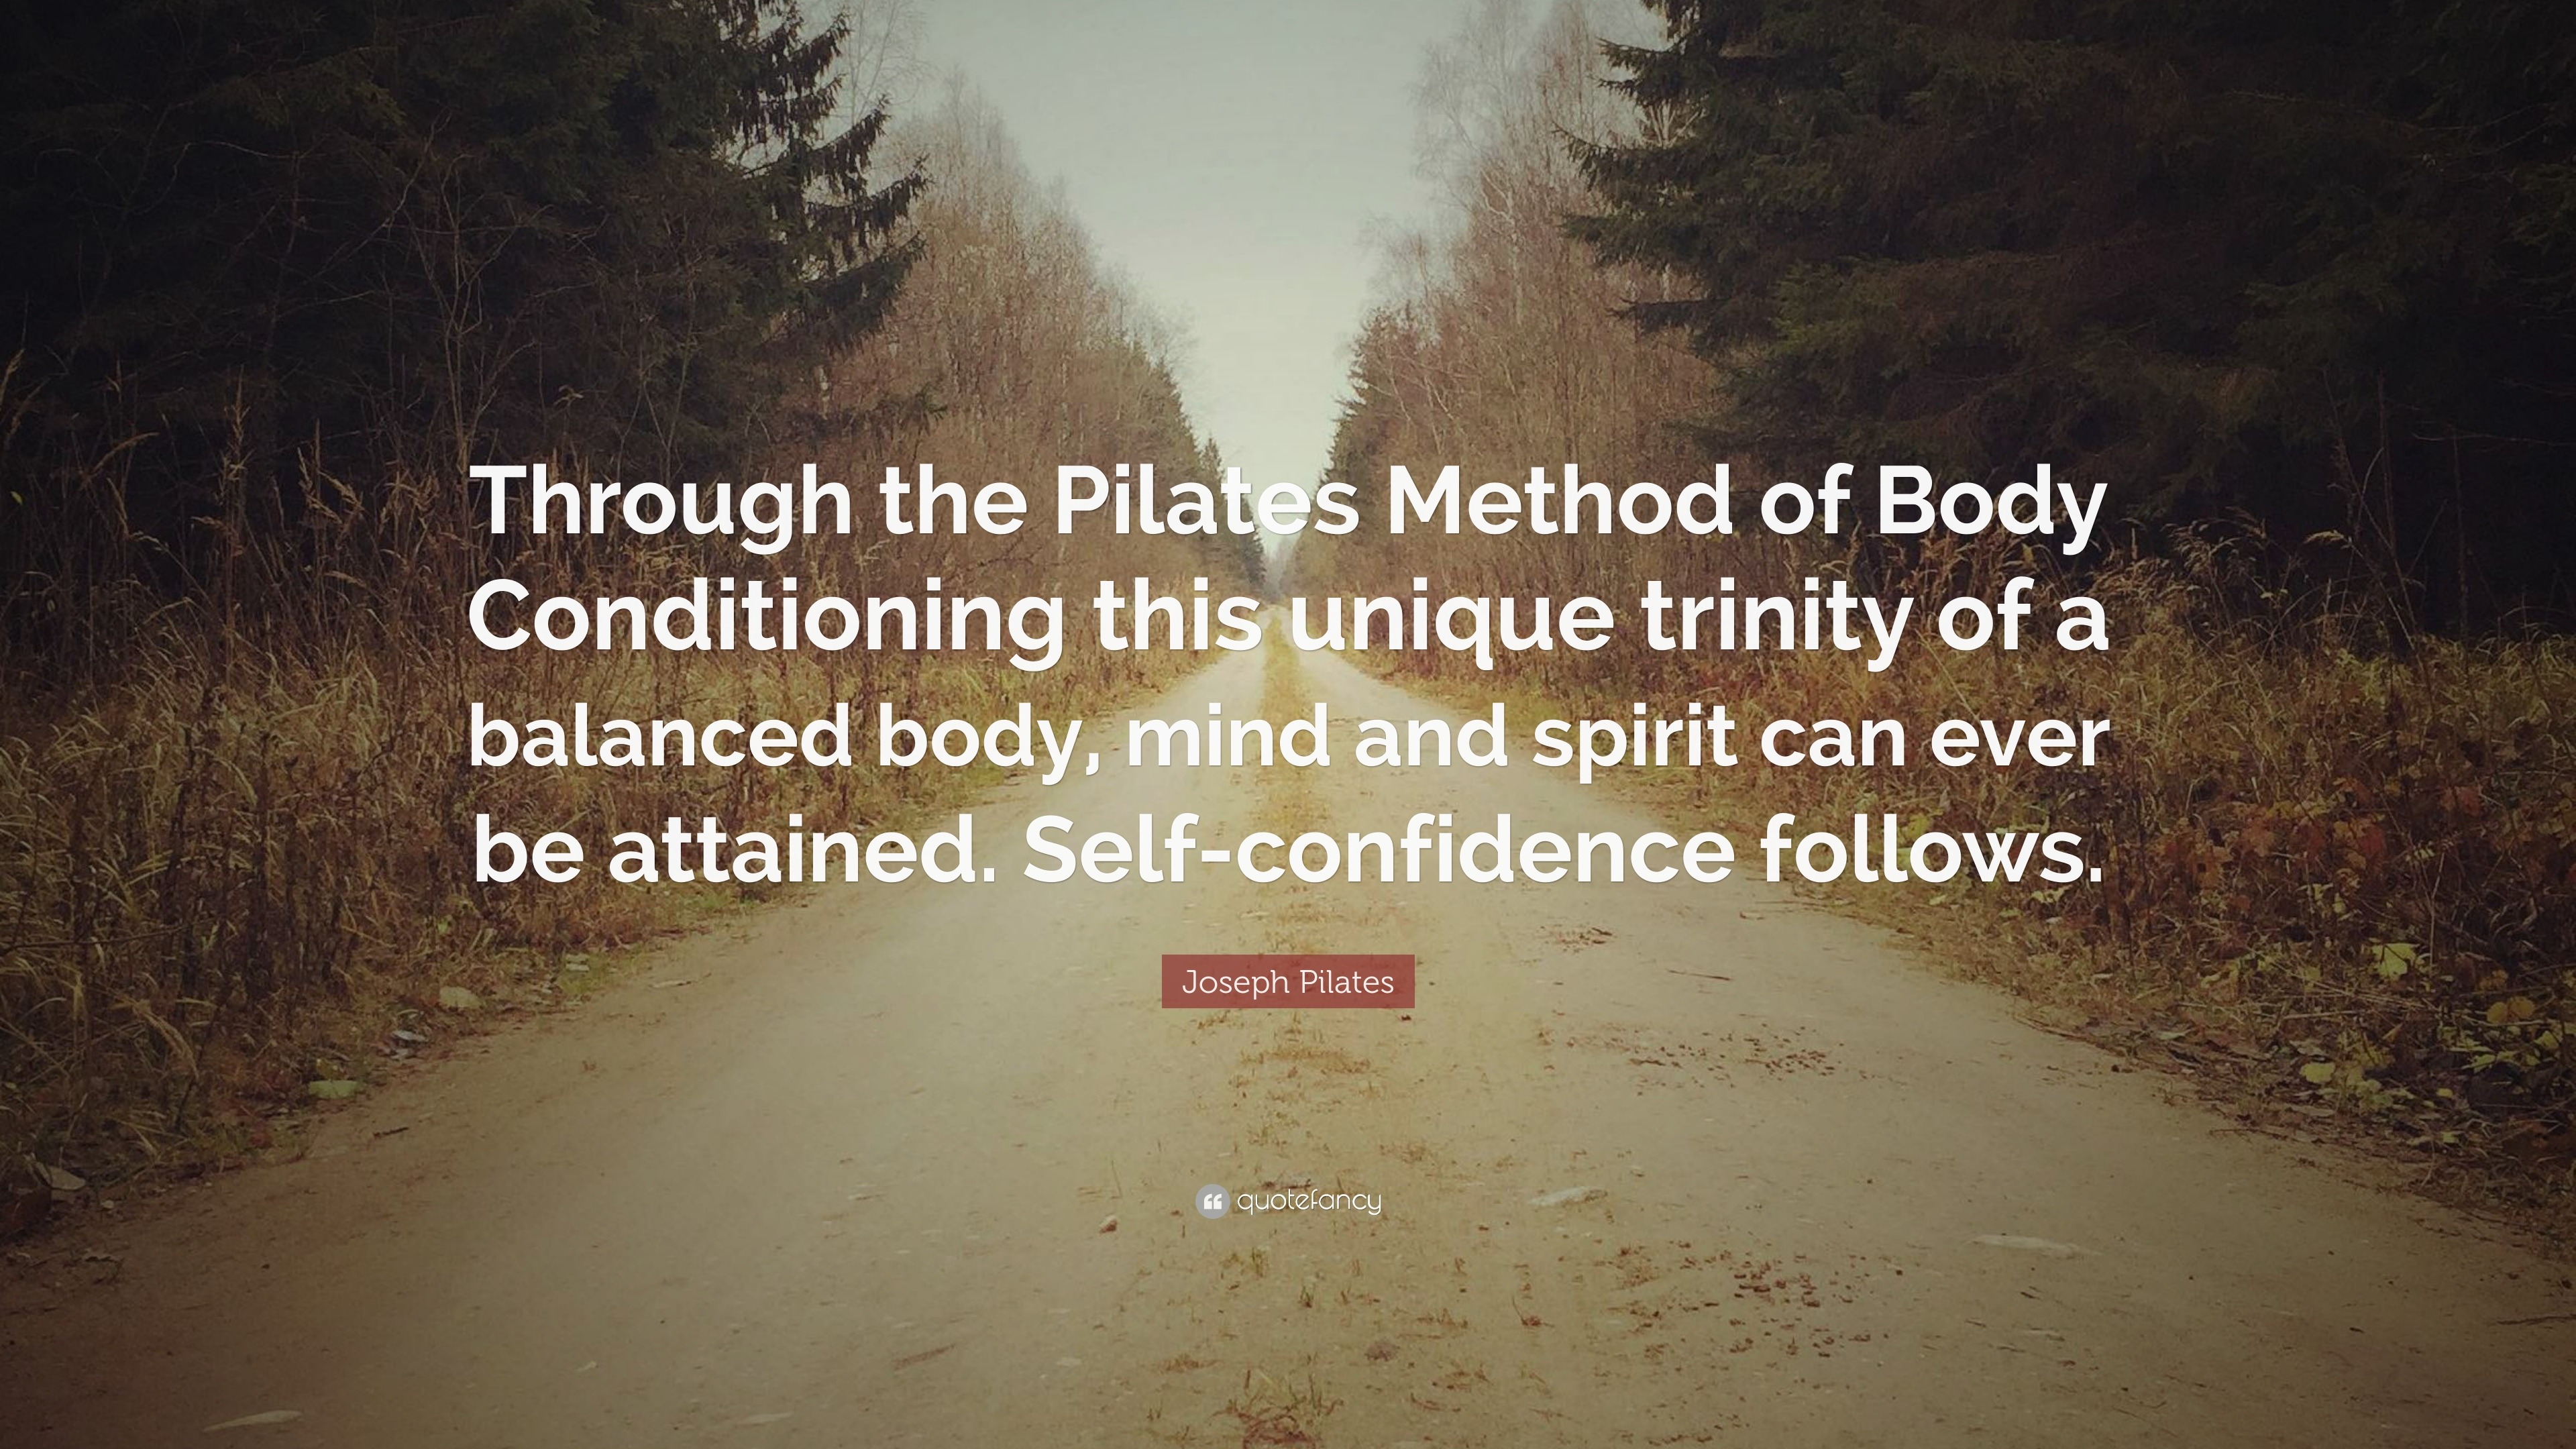 Joseph Pilates Quote: “Through the Pilates Method of Body Conditioning this  unique trinity of a balanced body, mind and spirit can ever be atta”